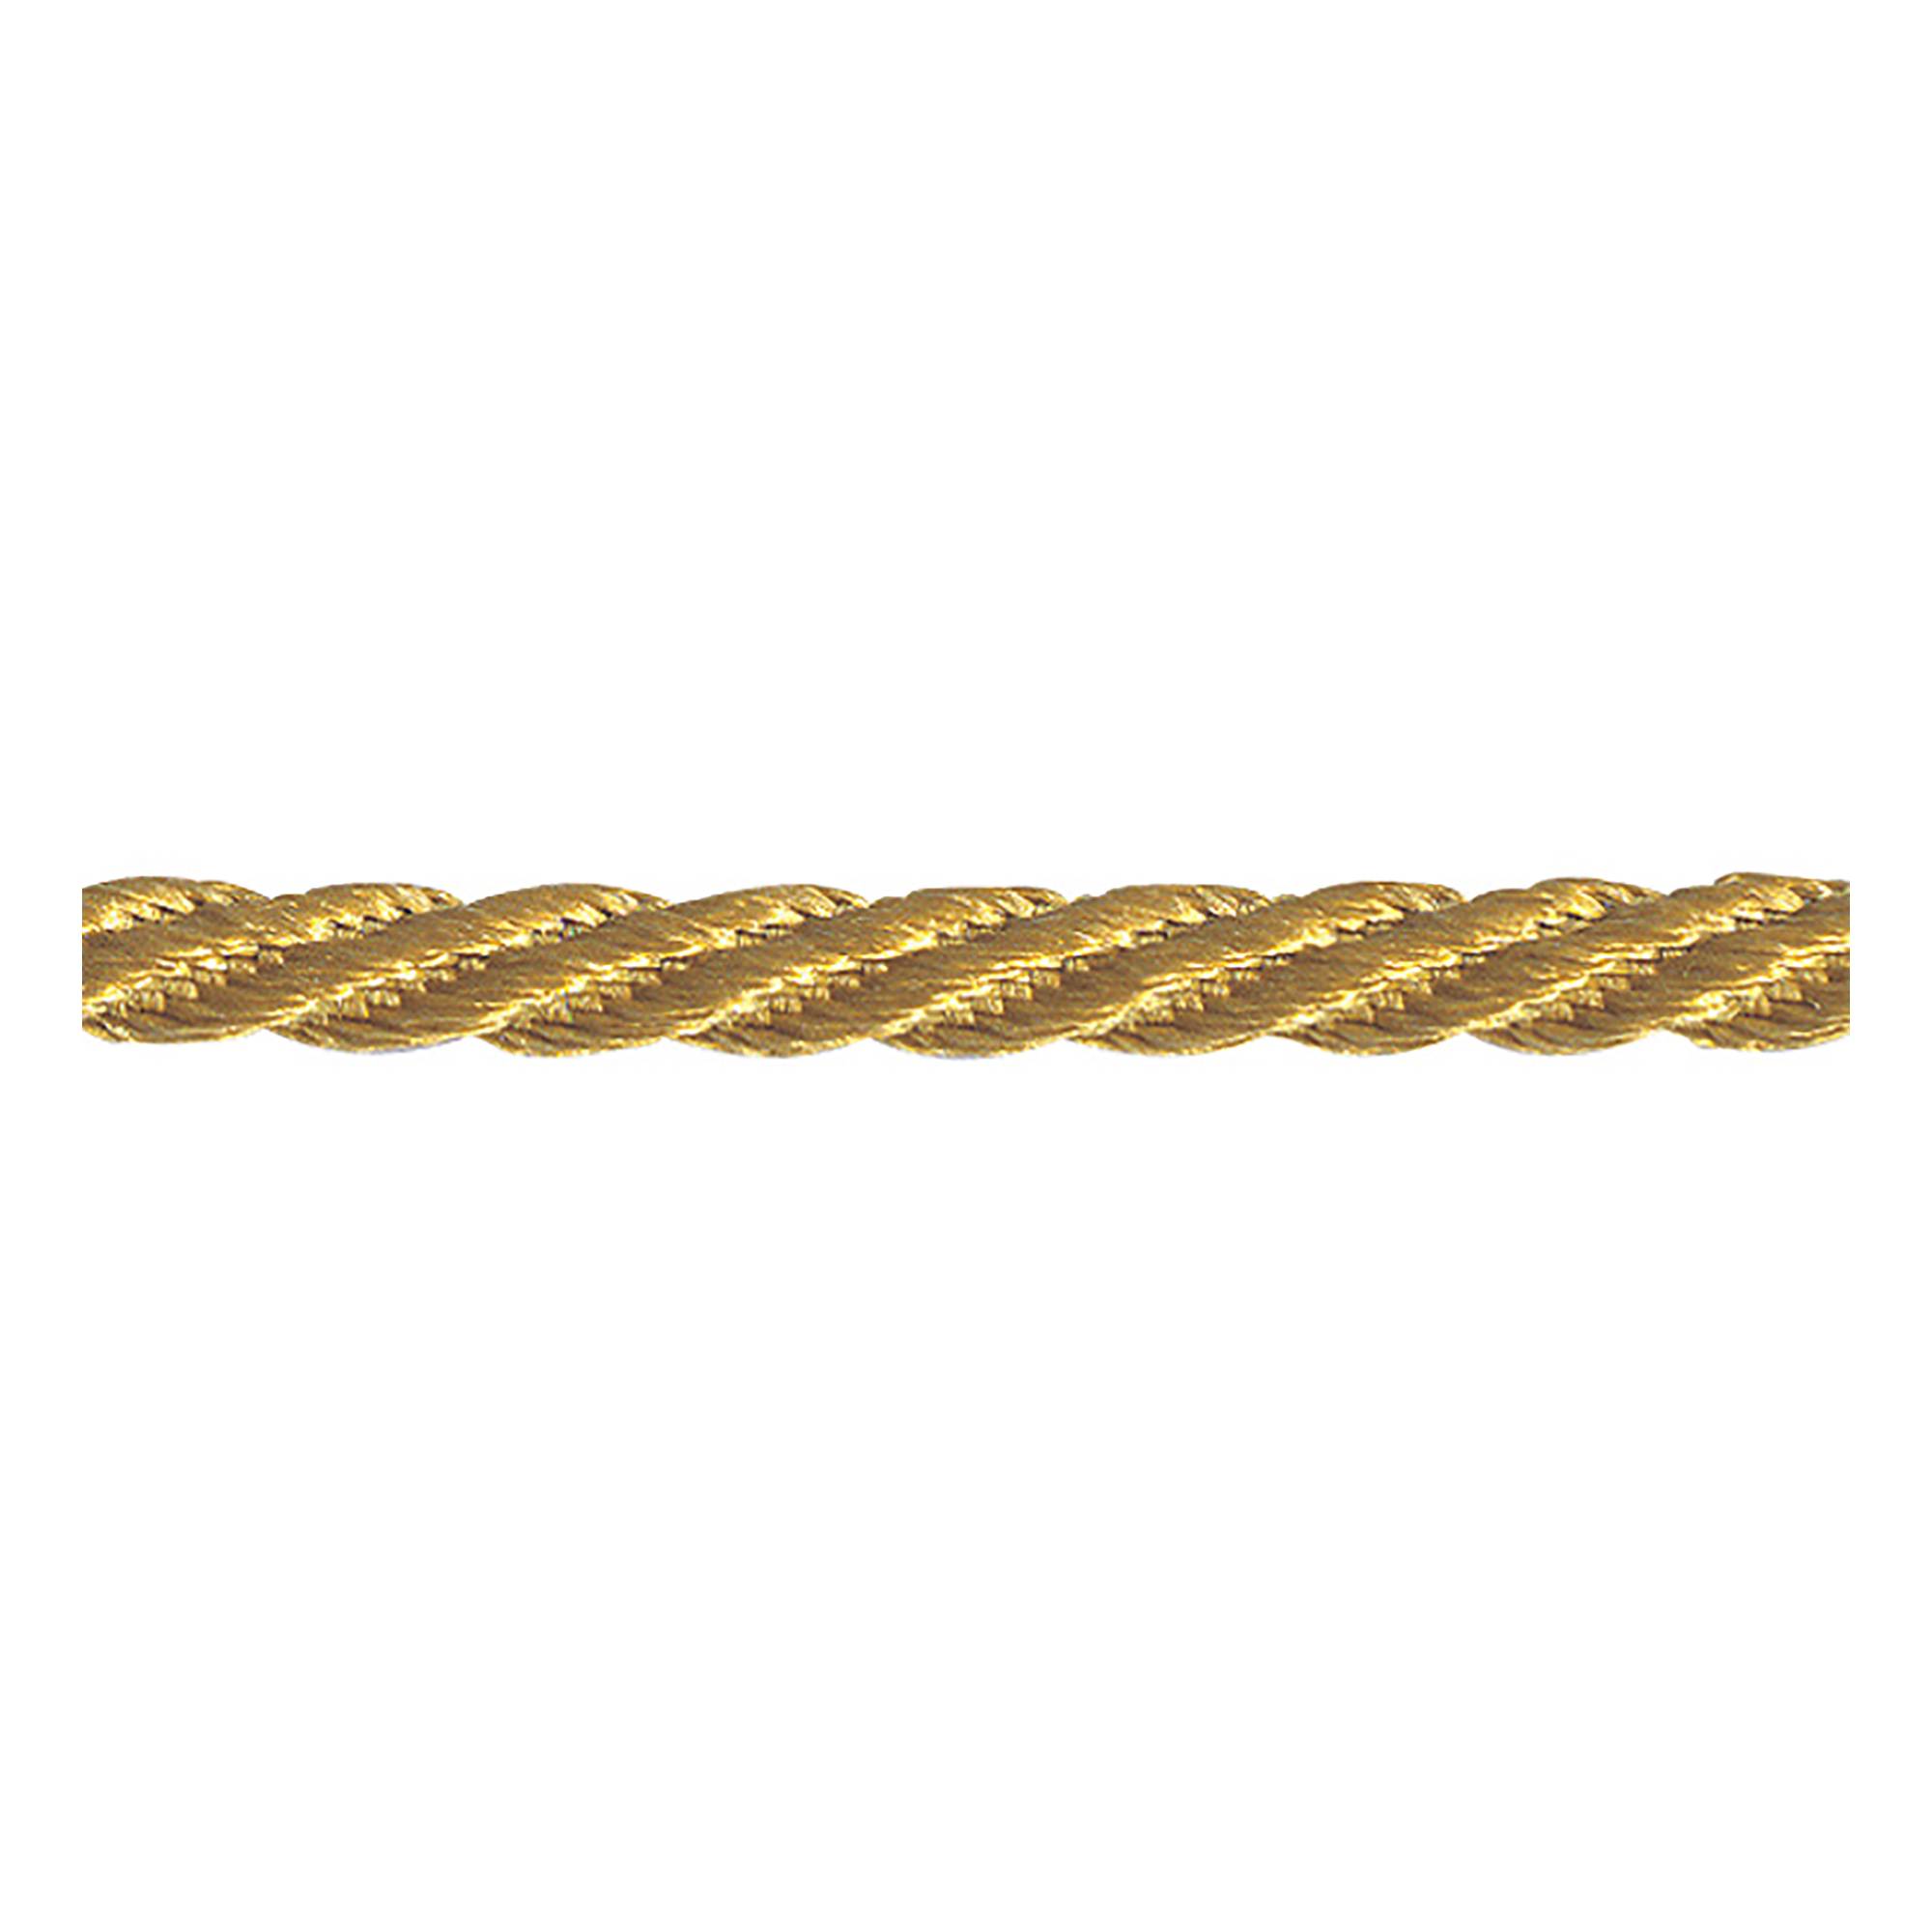 Berisfords Honey Gold Barley Twist Rope by the Metre